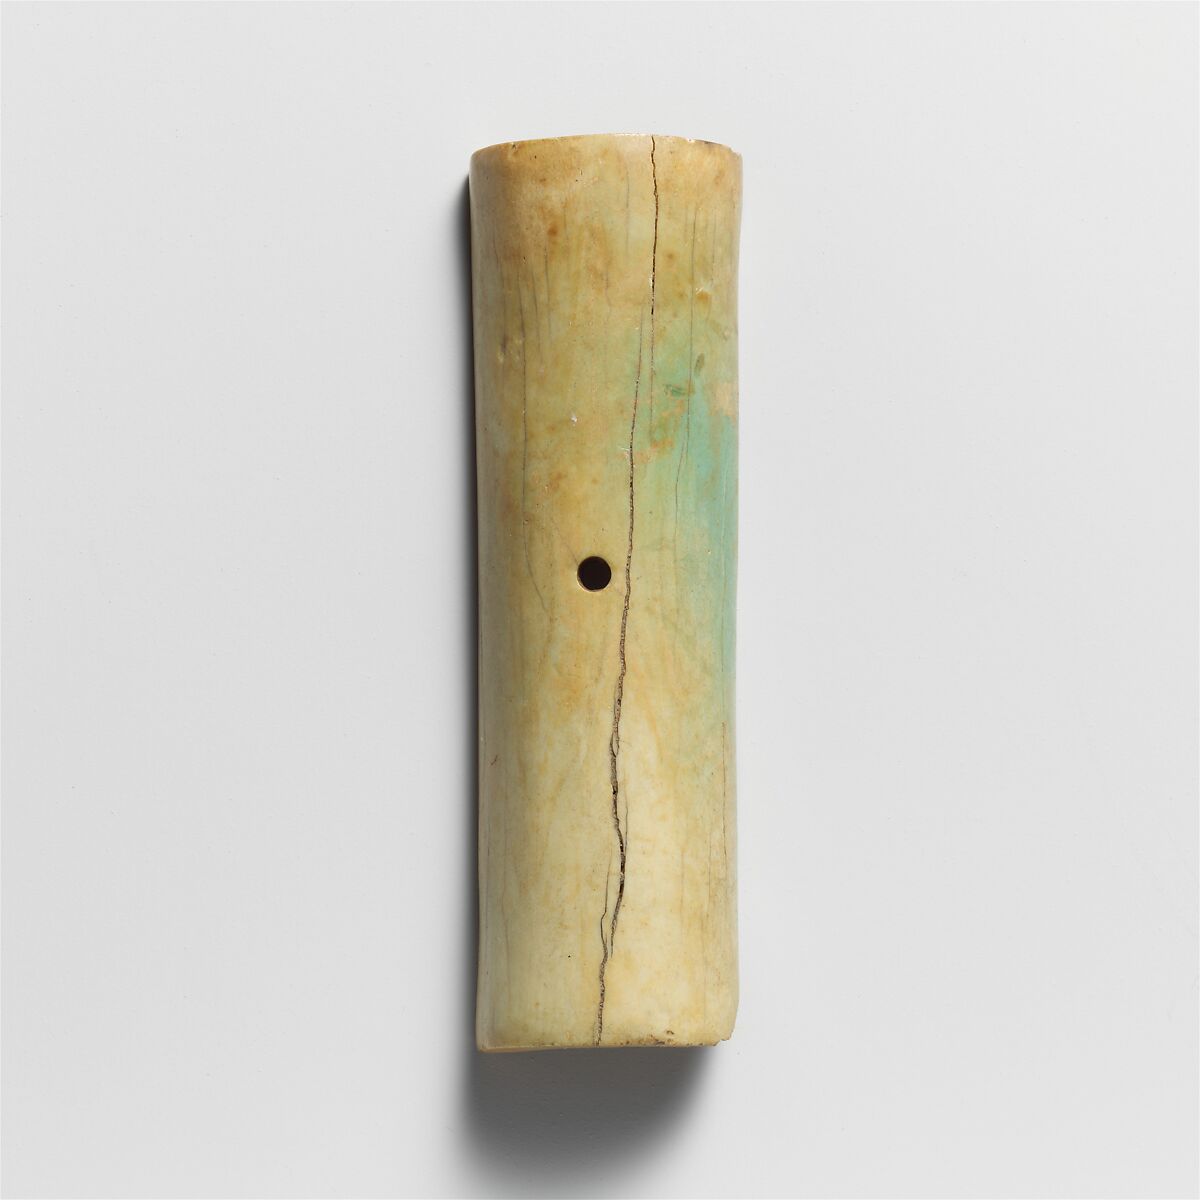 Section of an ivory cylinder with a hole, Ivory, Greek, Laconian 